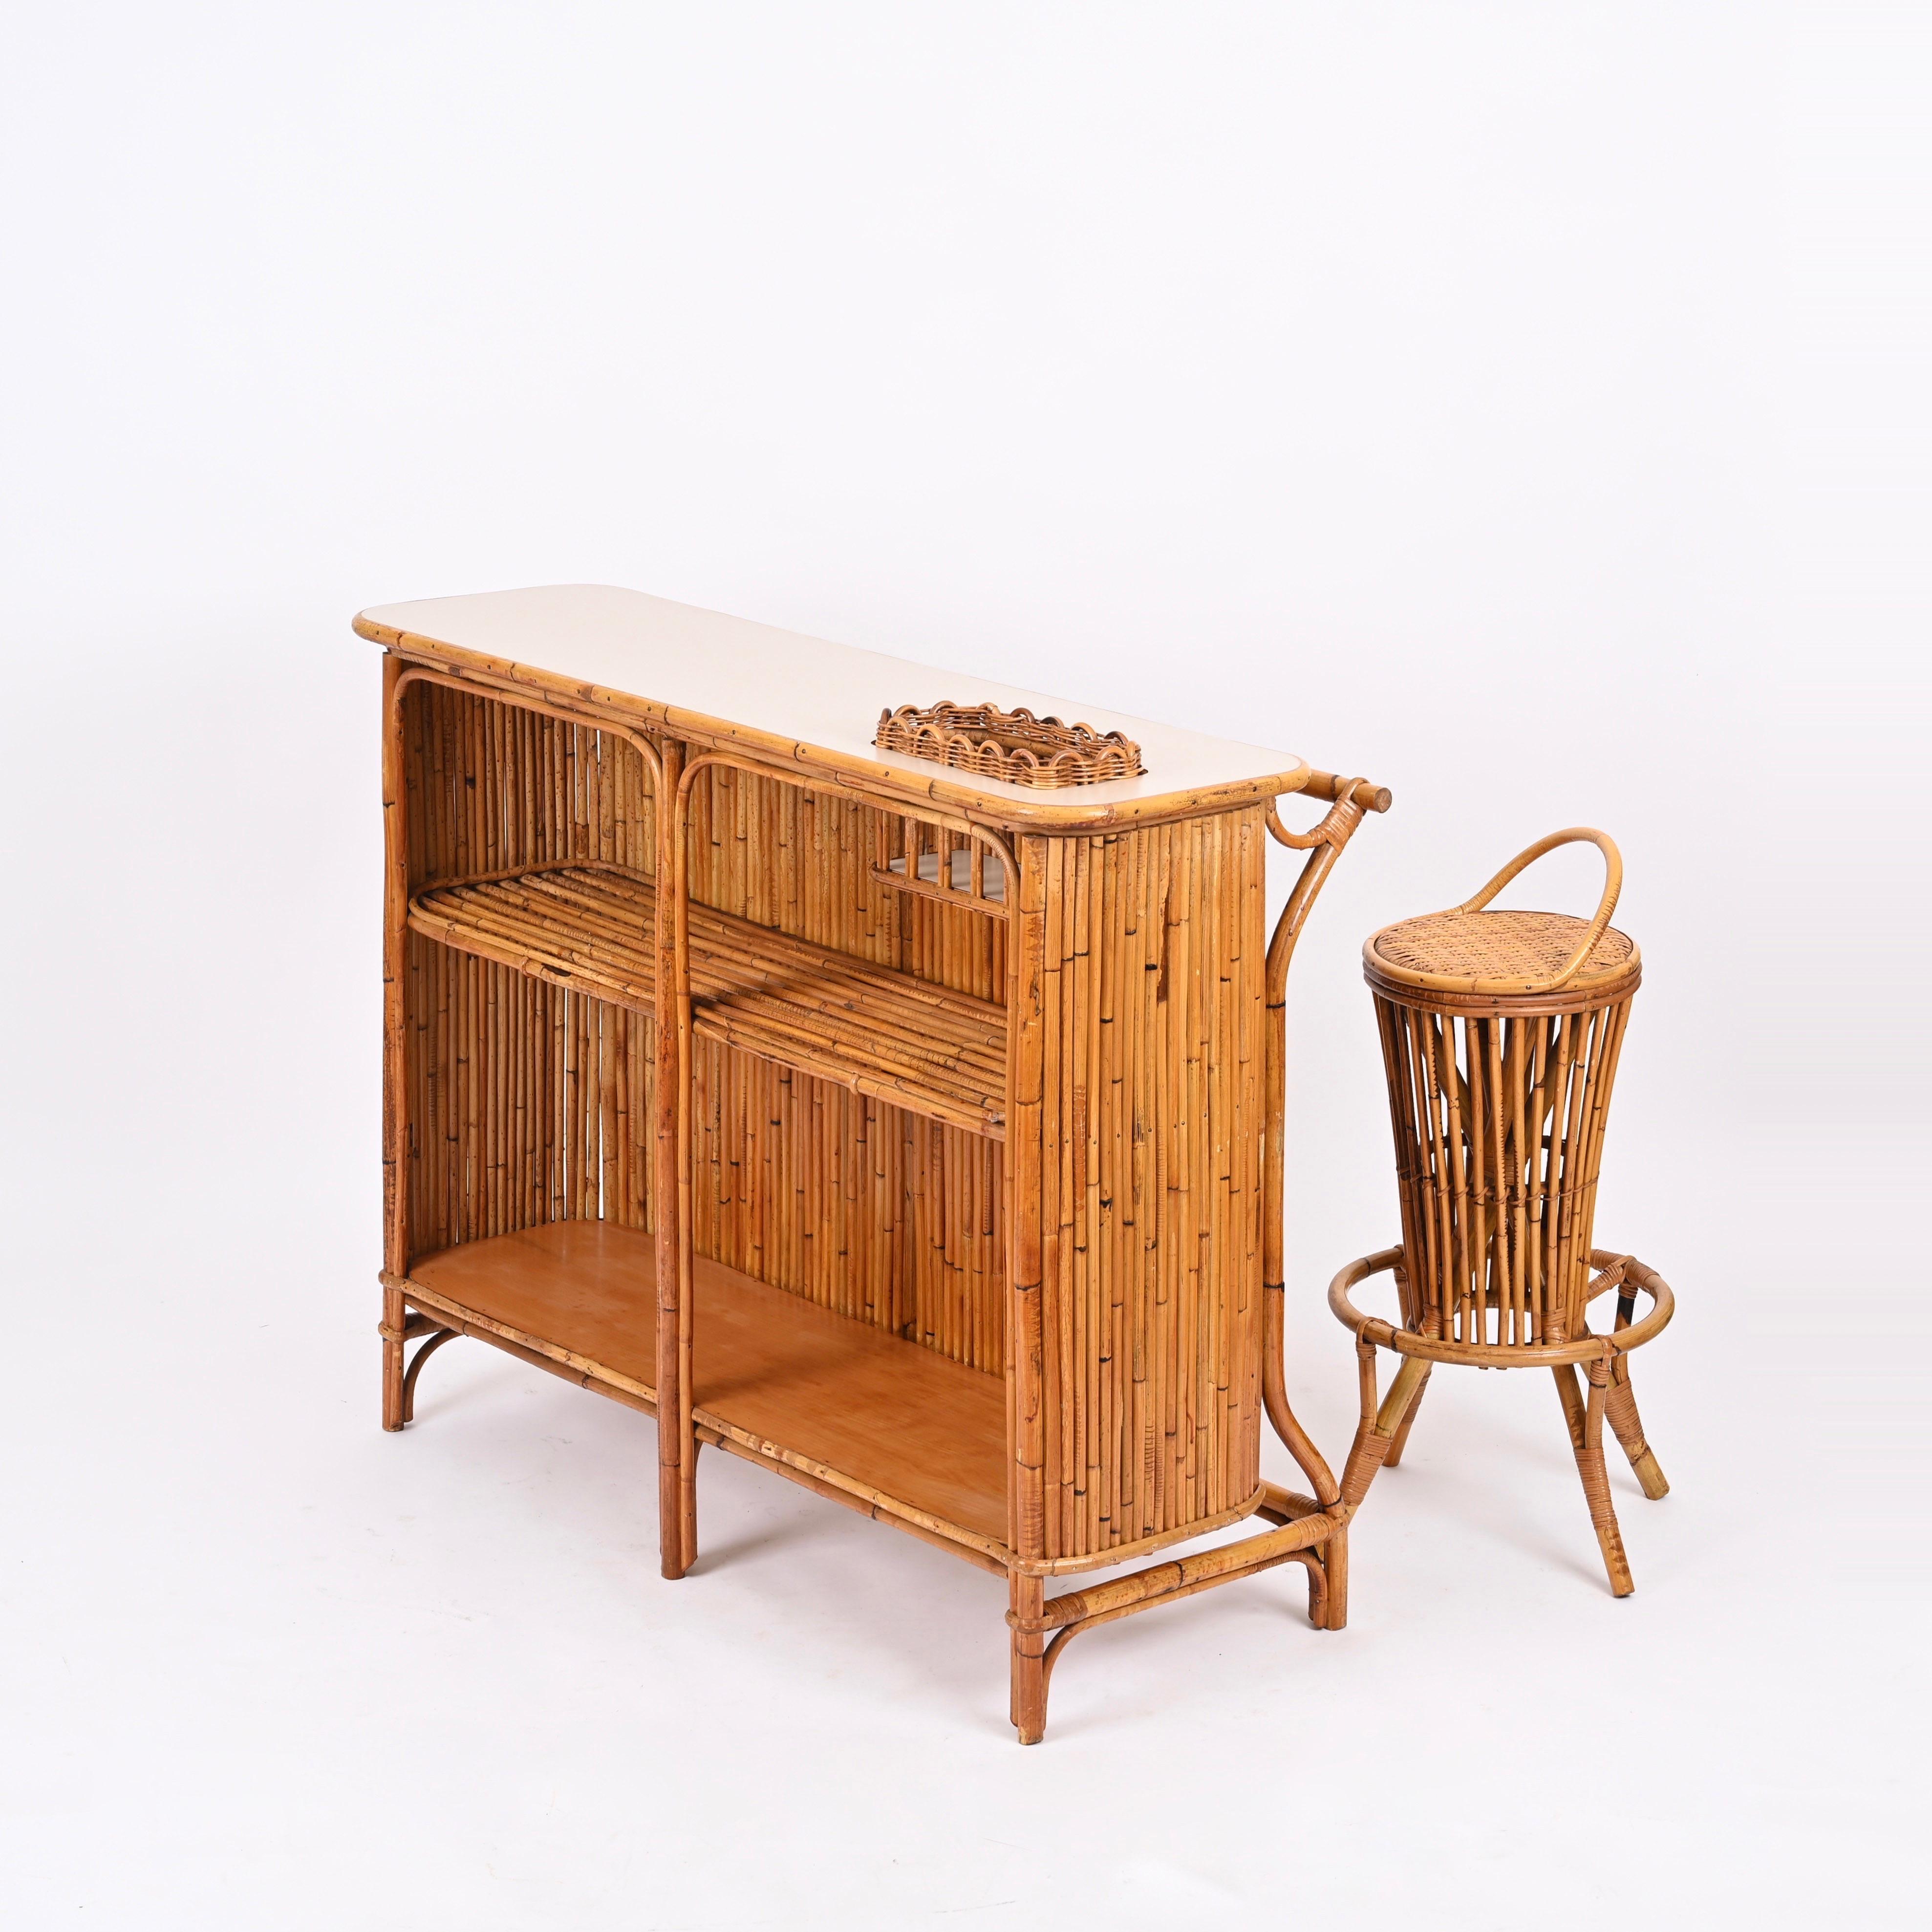 Marvelous Mid-Century dry bar with two stools made in a gorgeous mix of bamboo, rattan, wicker and white formica. This charming bar was designed by Tito Agnoli and made in Italy during the 1950s.

Fully original and in spectacular conditions. This